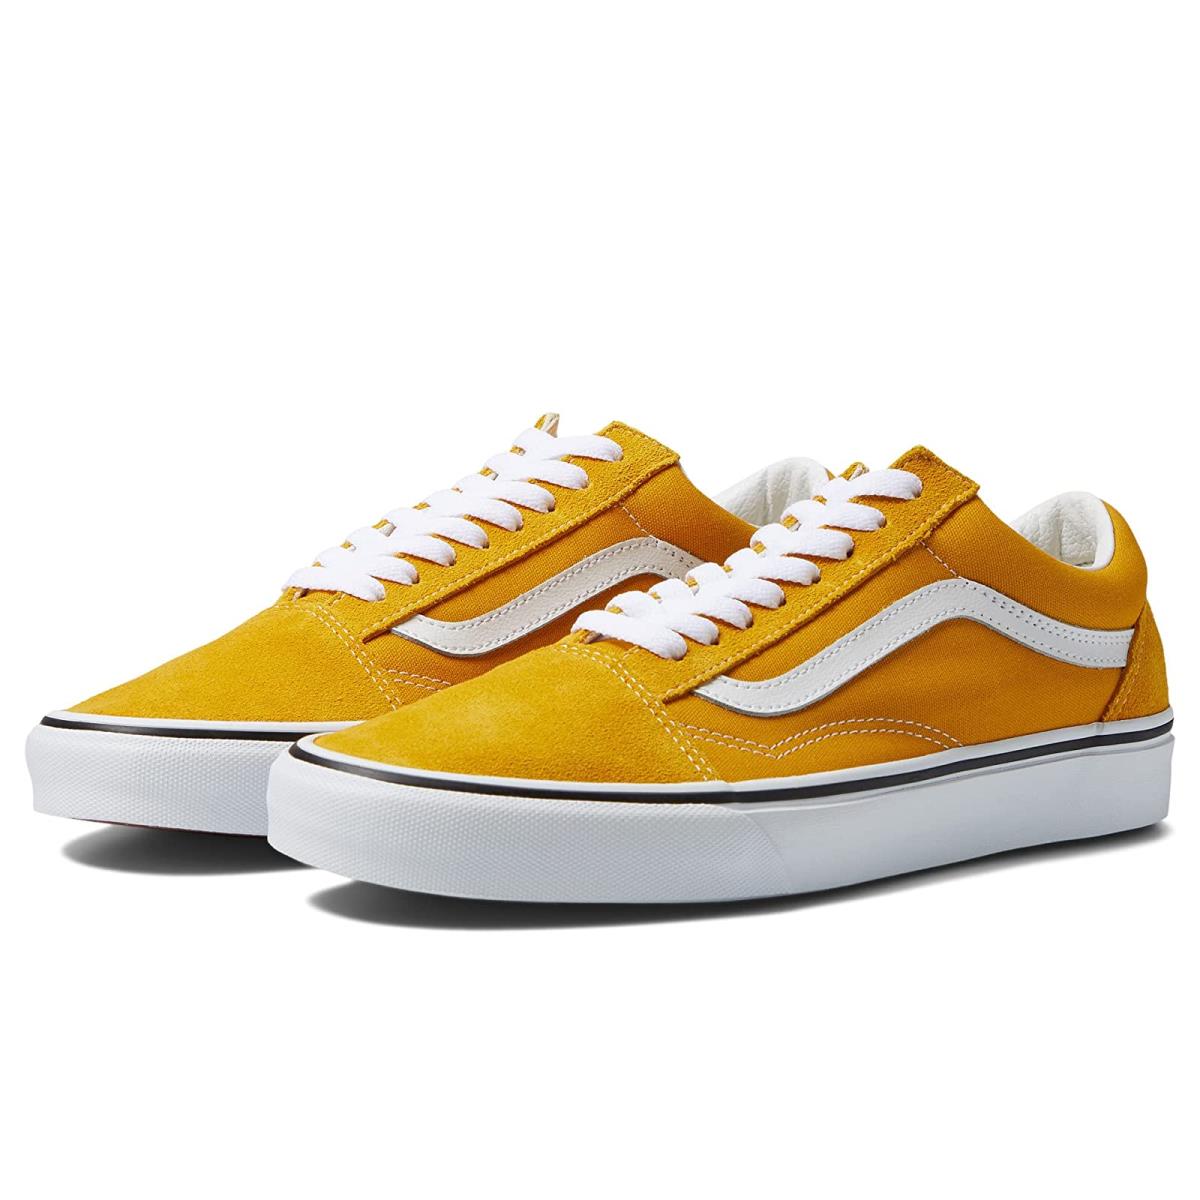 Unisex Sneakers Athletic Shoes Vans Old Skool Color Theory Golden Yellow